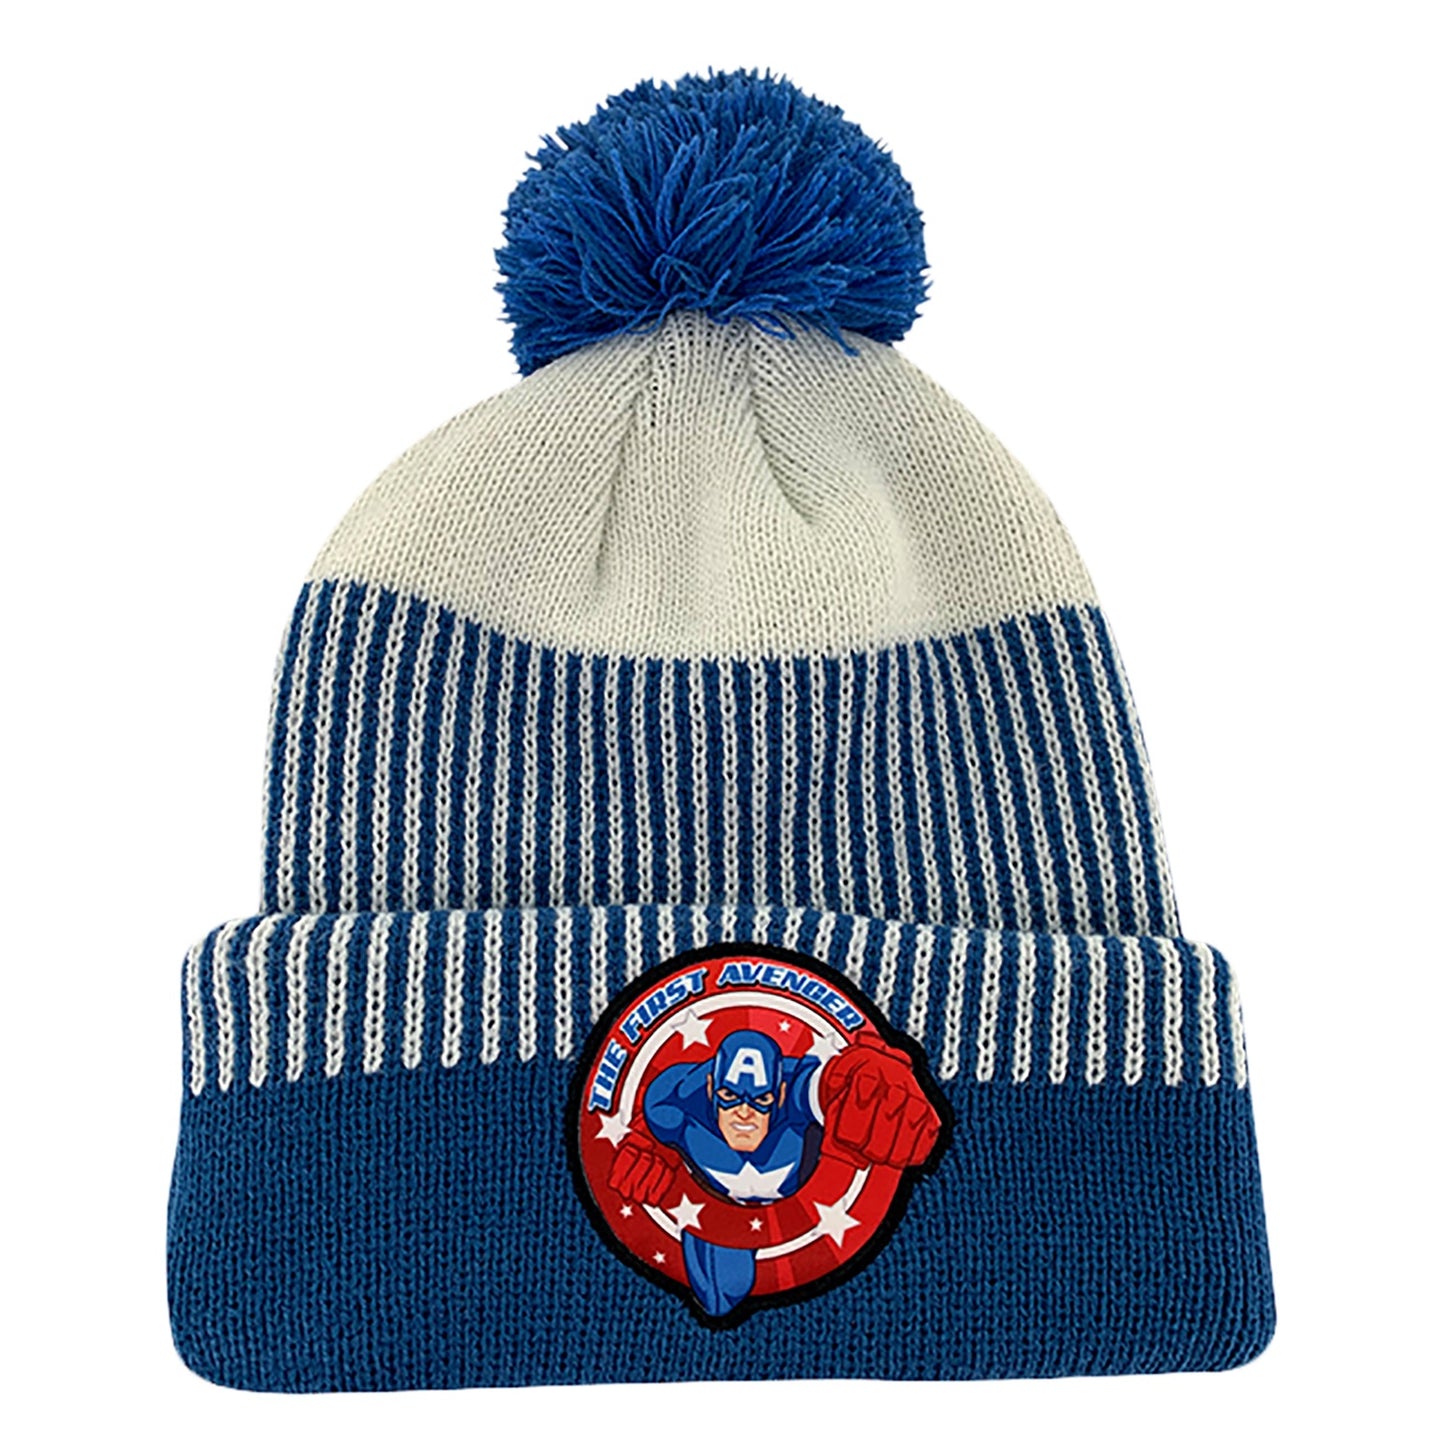 White and Blue Captain America Beanie Hat